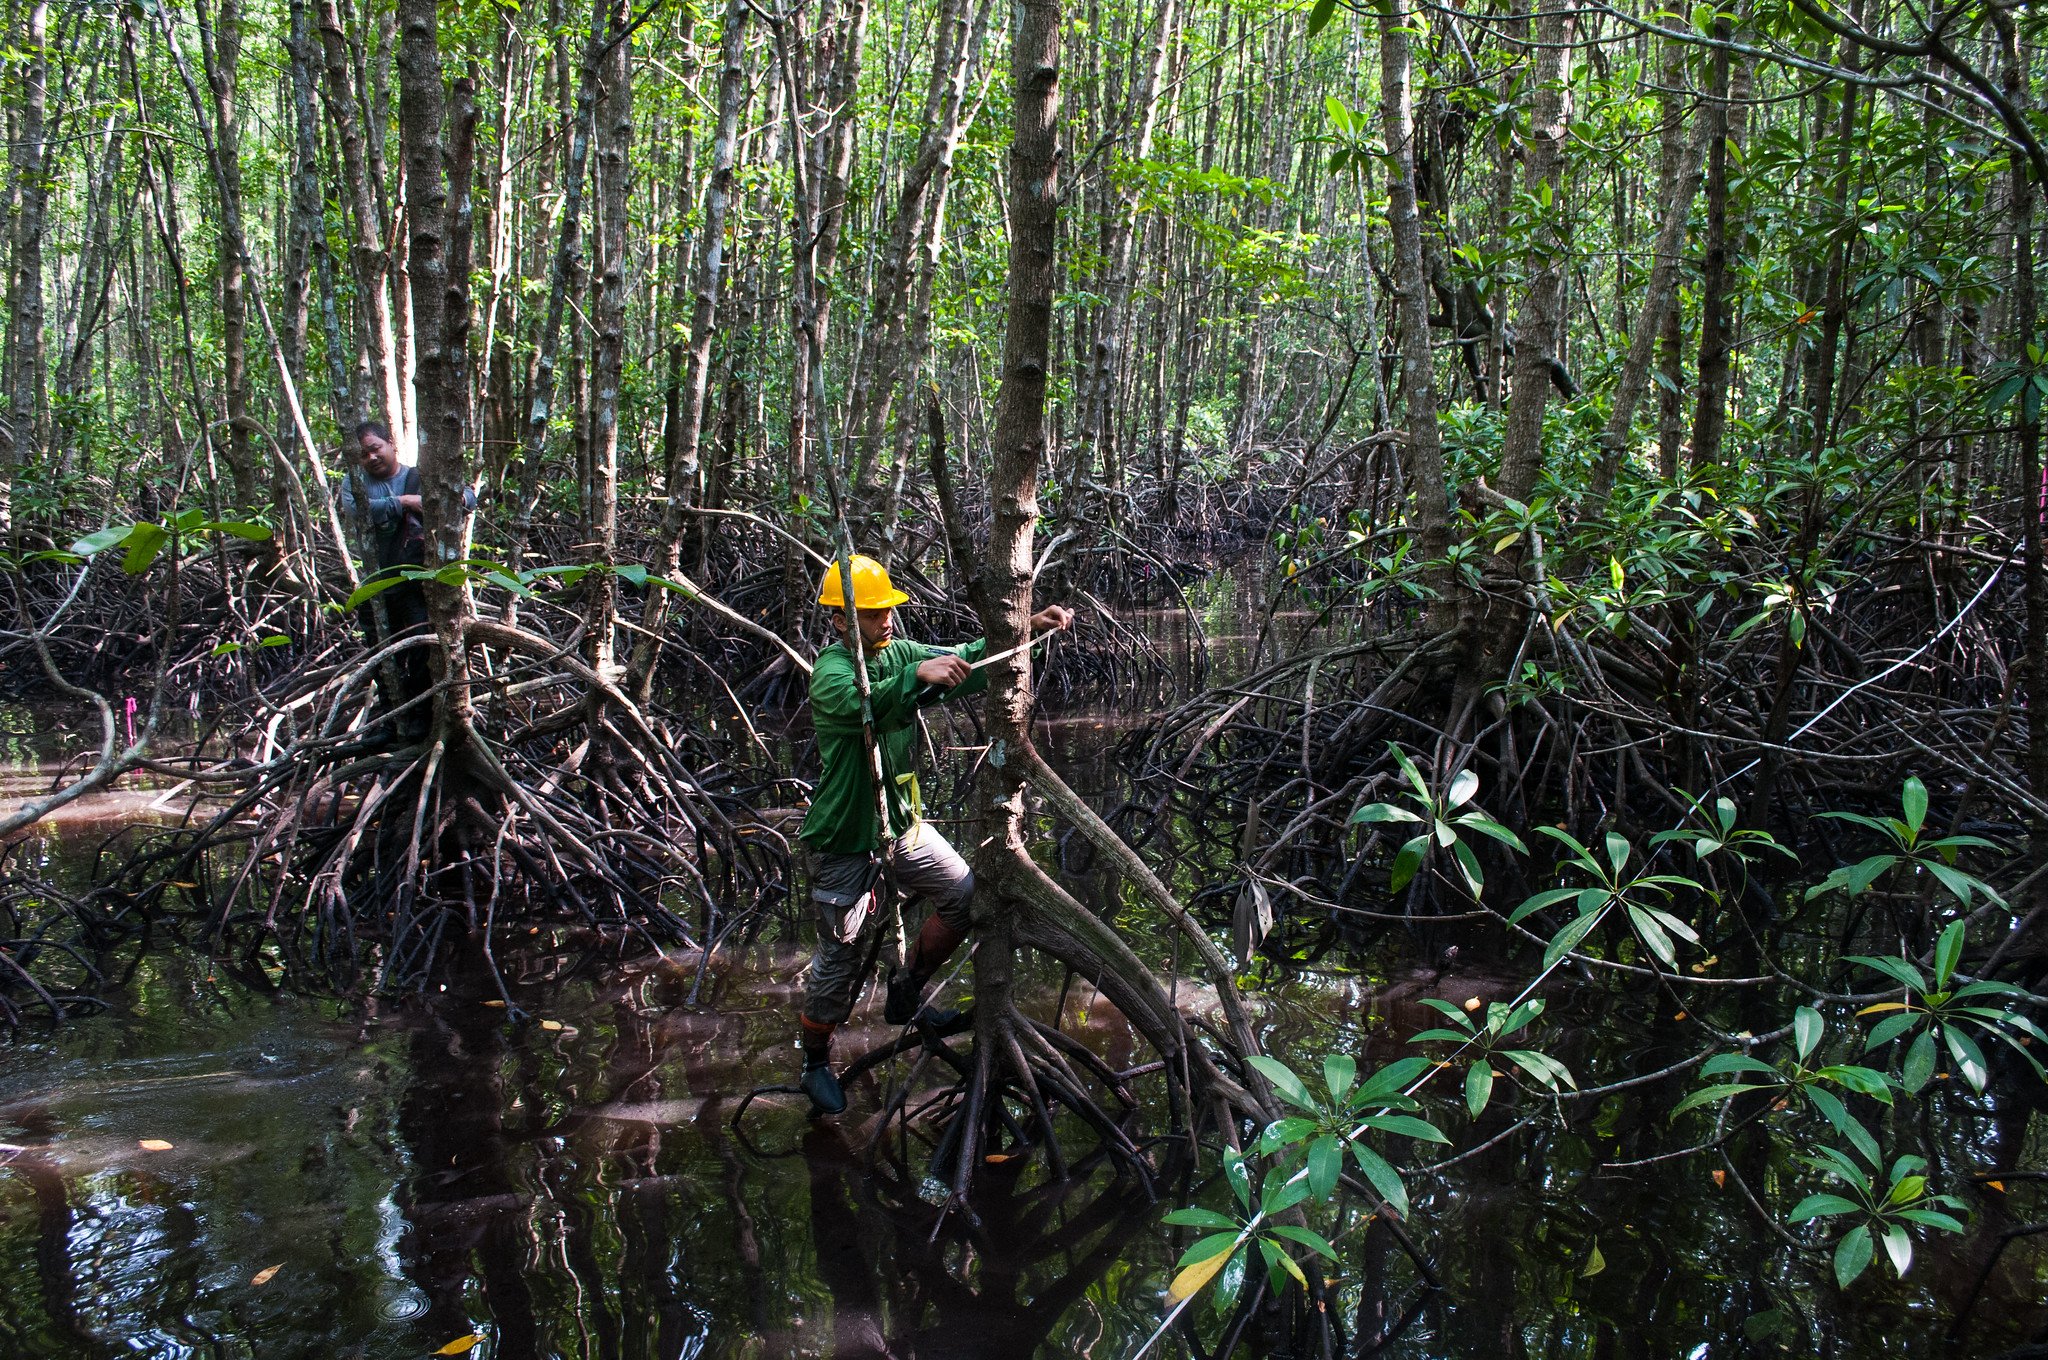 Loss of Mangrove Forest Worldwide Has Slowed to Near-Negligible Amounts, New Report Demonstrates